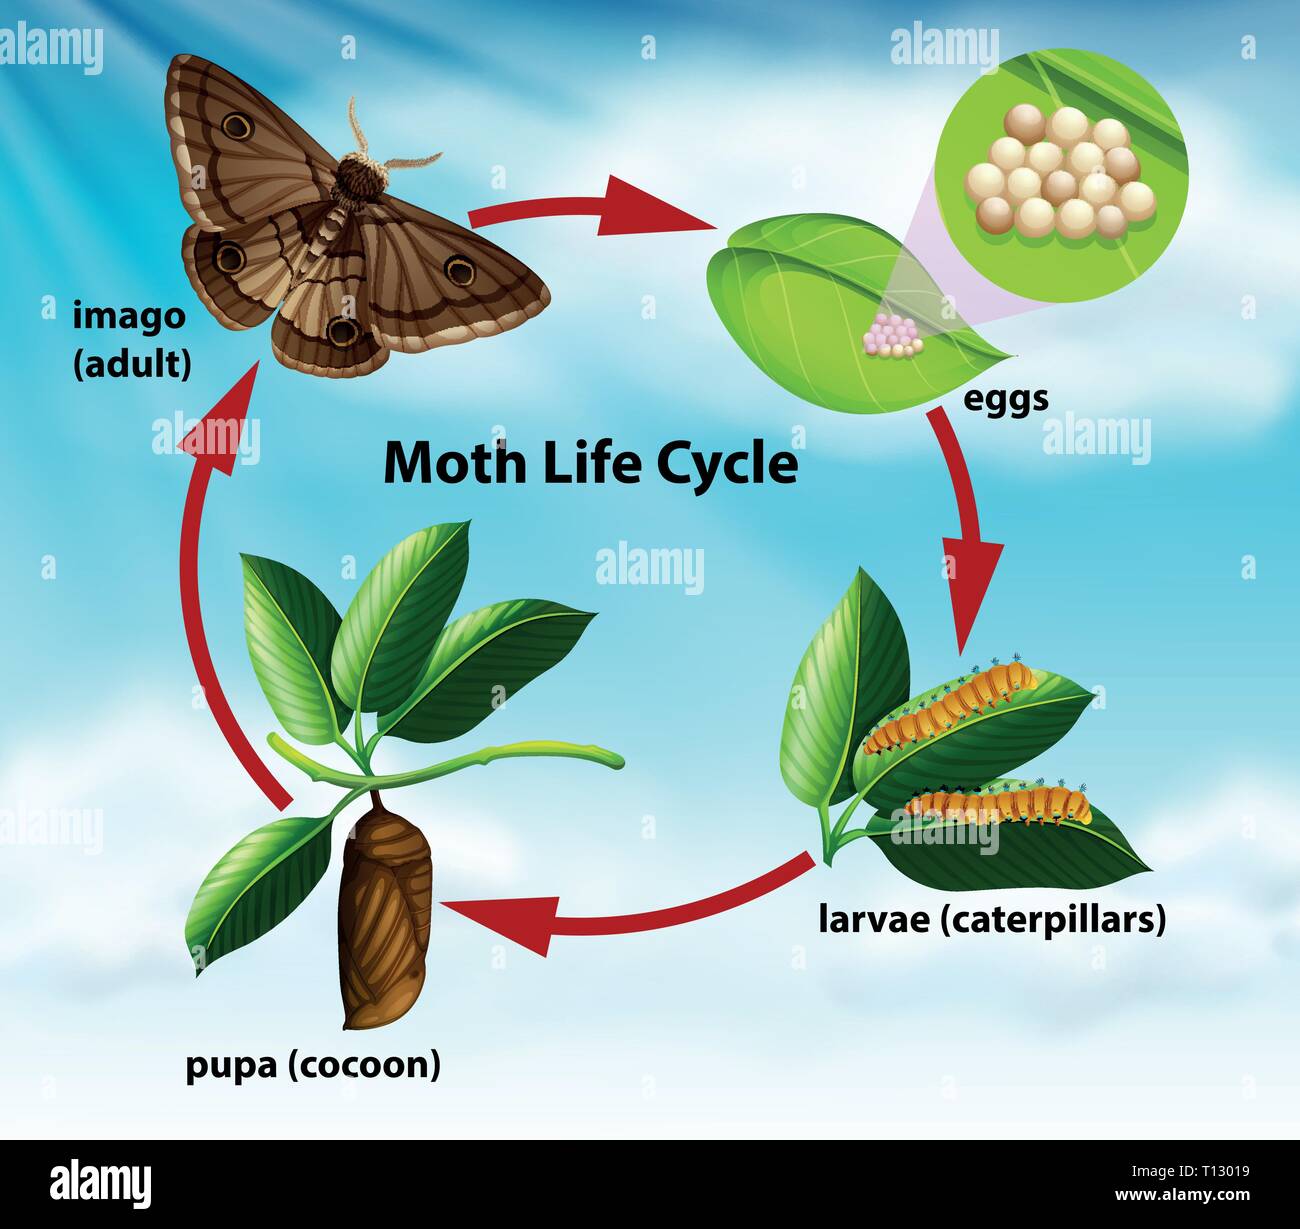 Life Cycle Of The Indian Meal Moth